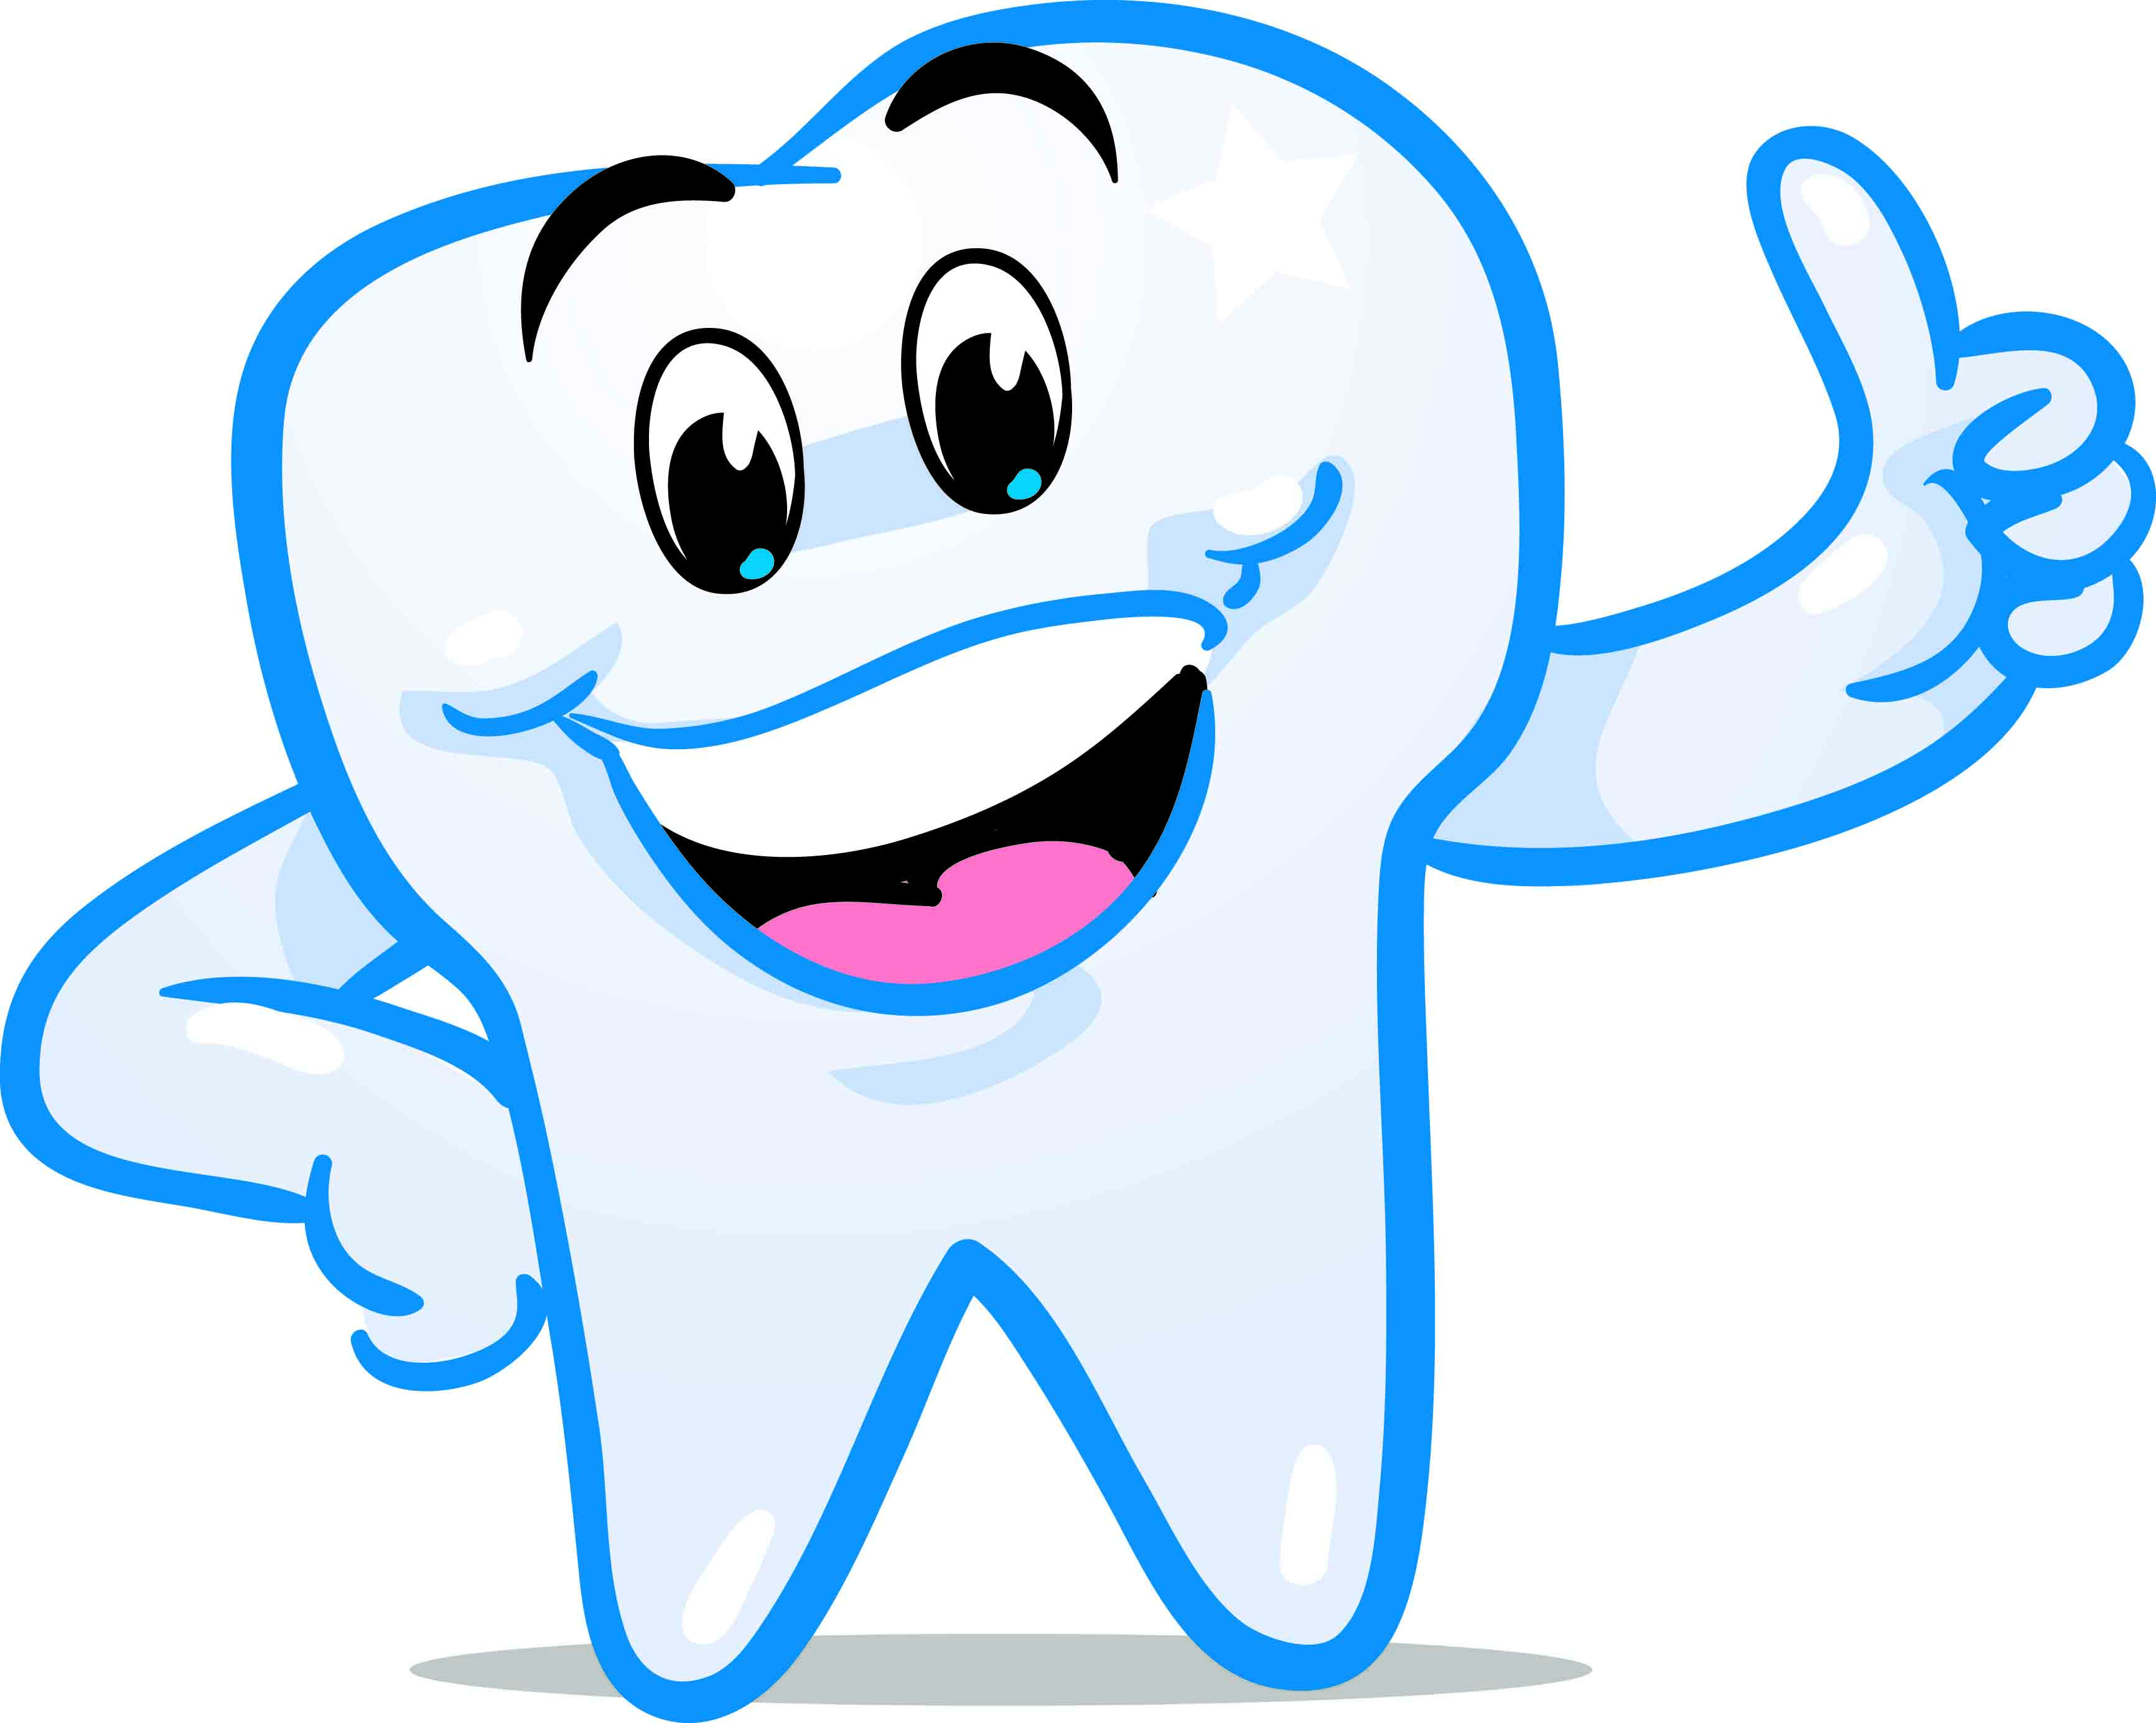 Smile Teeth Clipart | Clipart Panda - Free Clipart Images